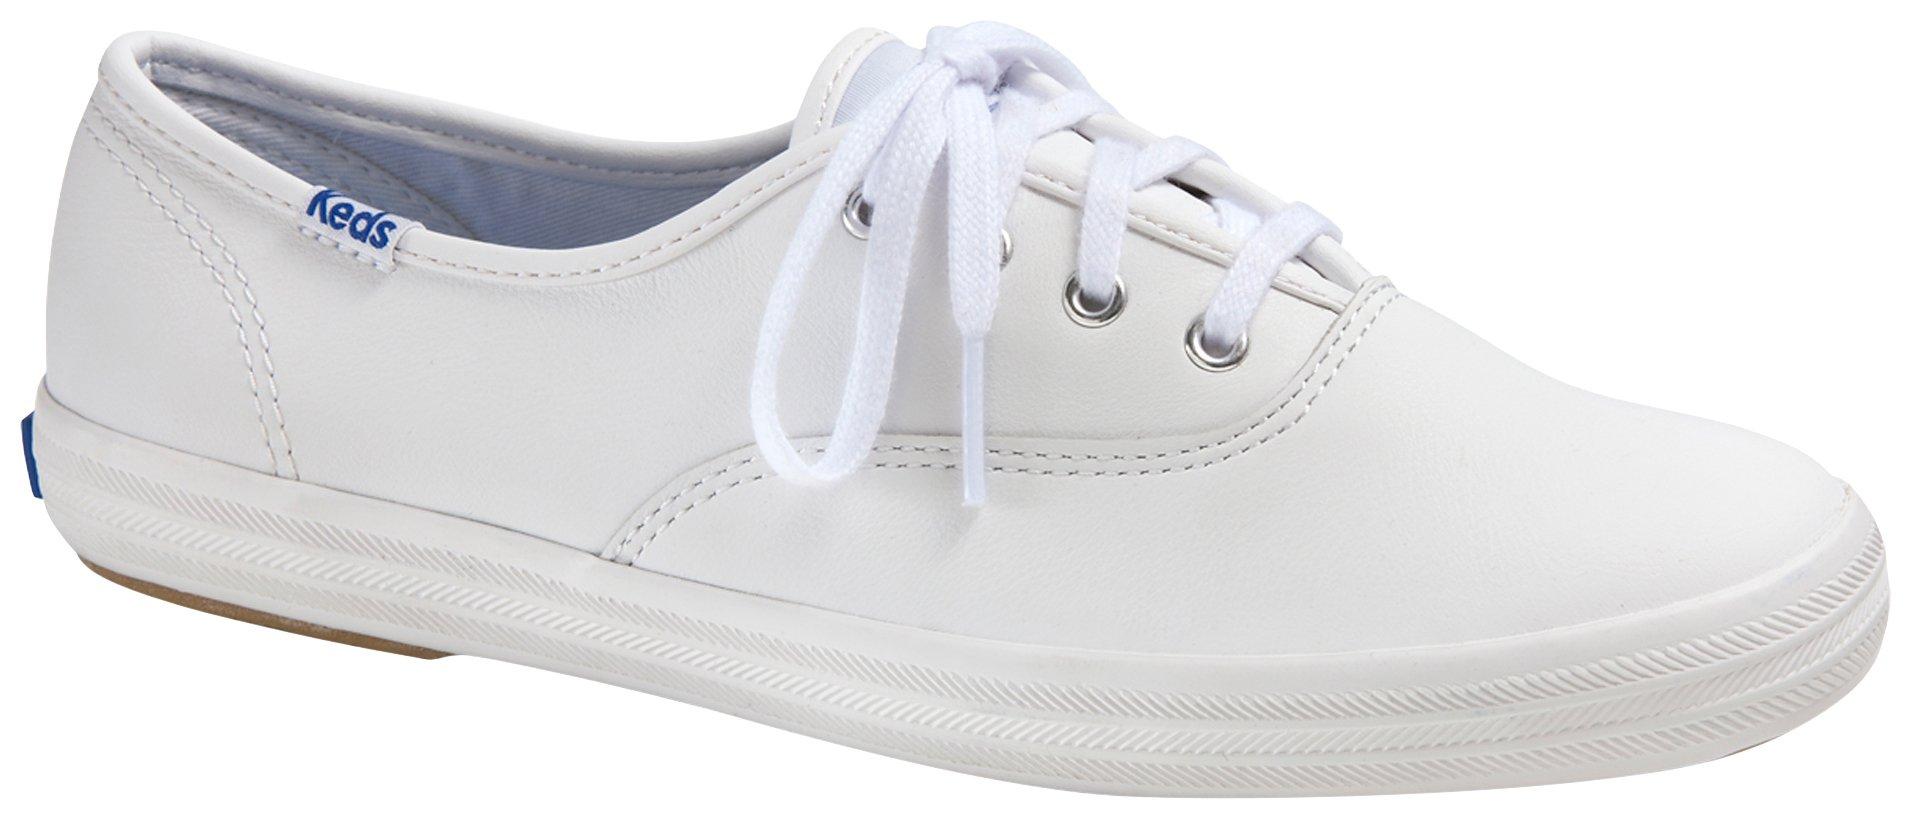 Keds Womens Champion Leather Sneakers | Bealls Florida